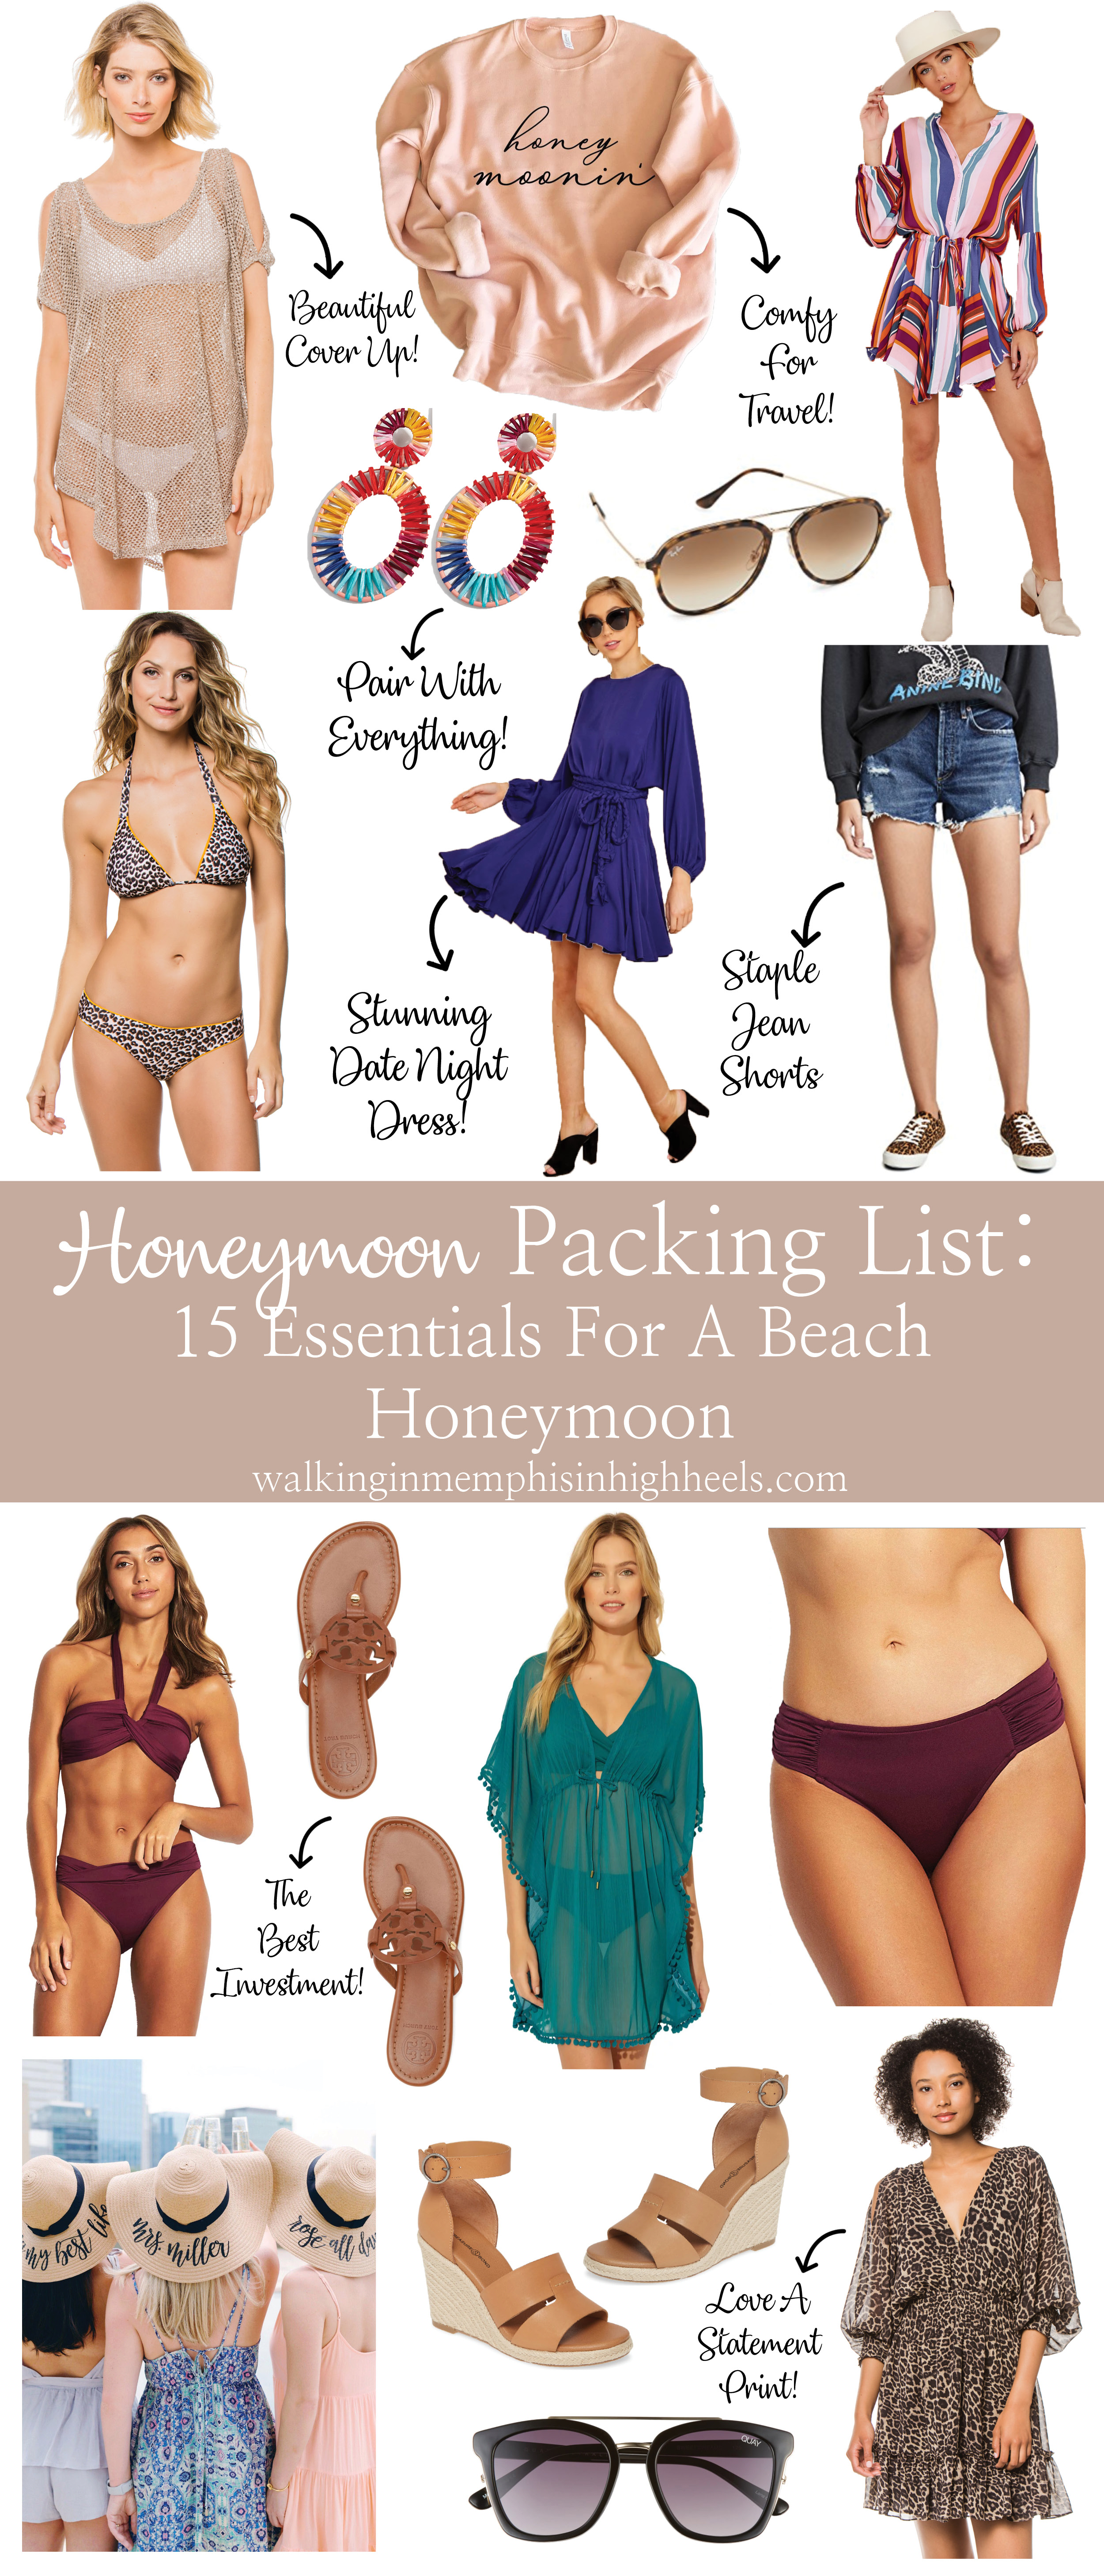 Honeymoon Packing List: 15 Essentials for a Beach Honeymoon featured by top US life and style blog, Walking in Memphis in High Heels.